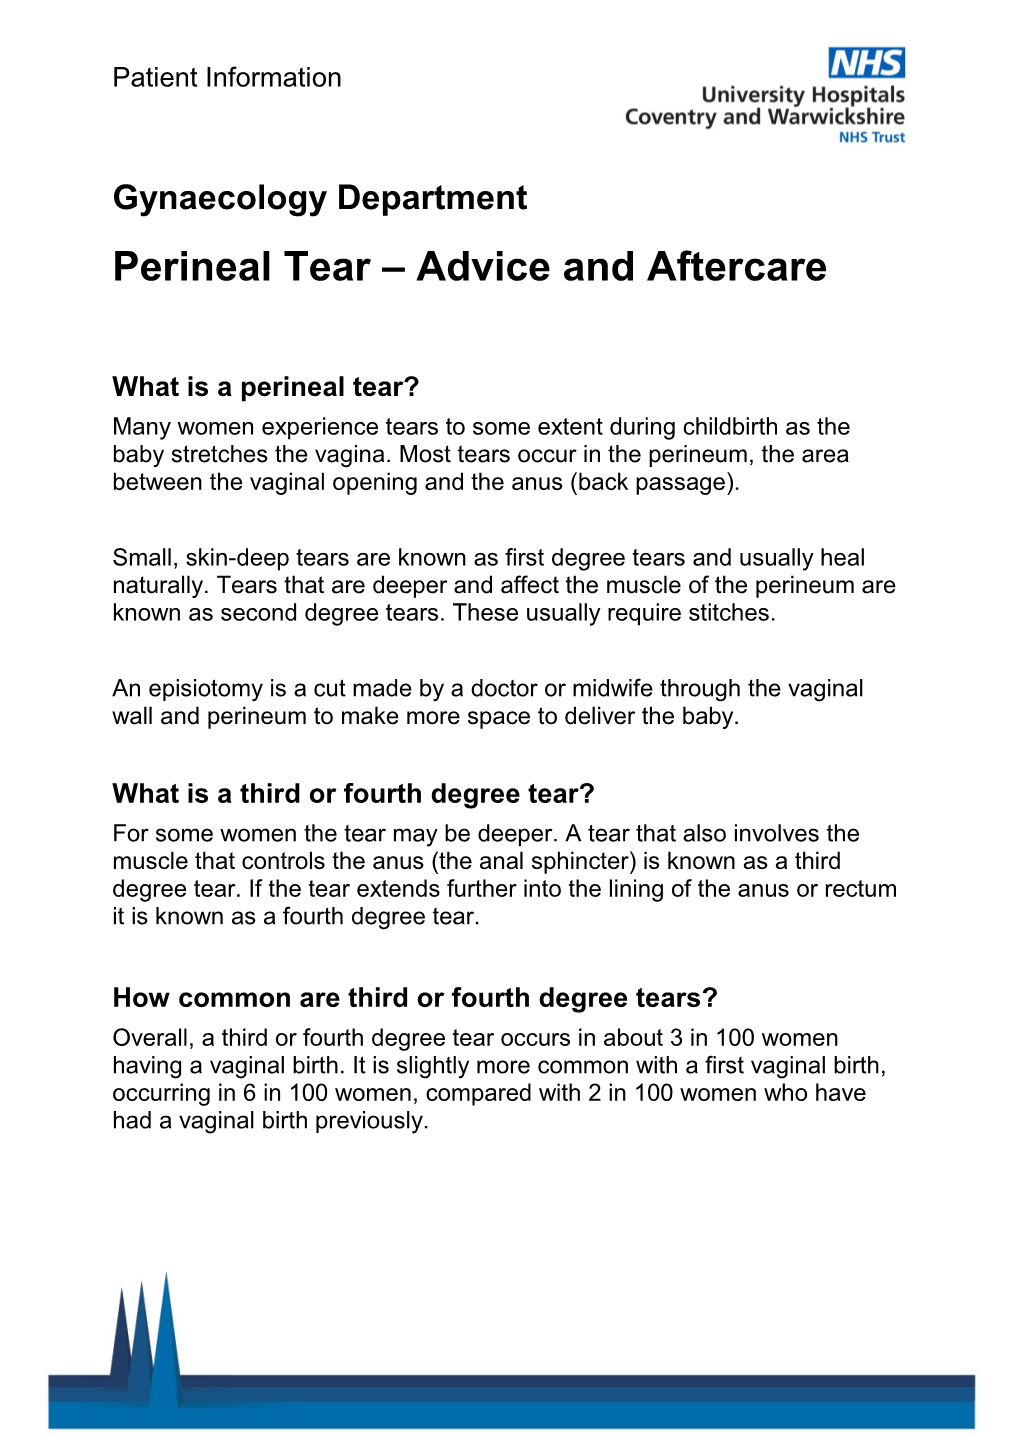 Perineal Tear – Advice and Aftercare